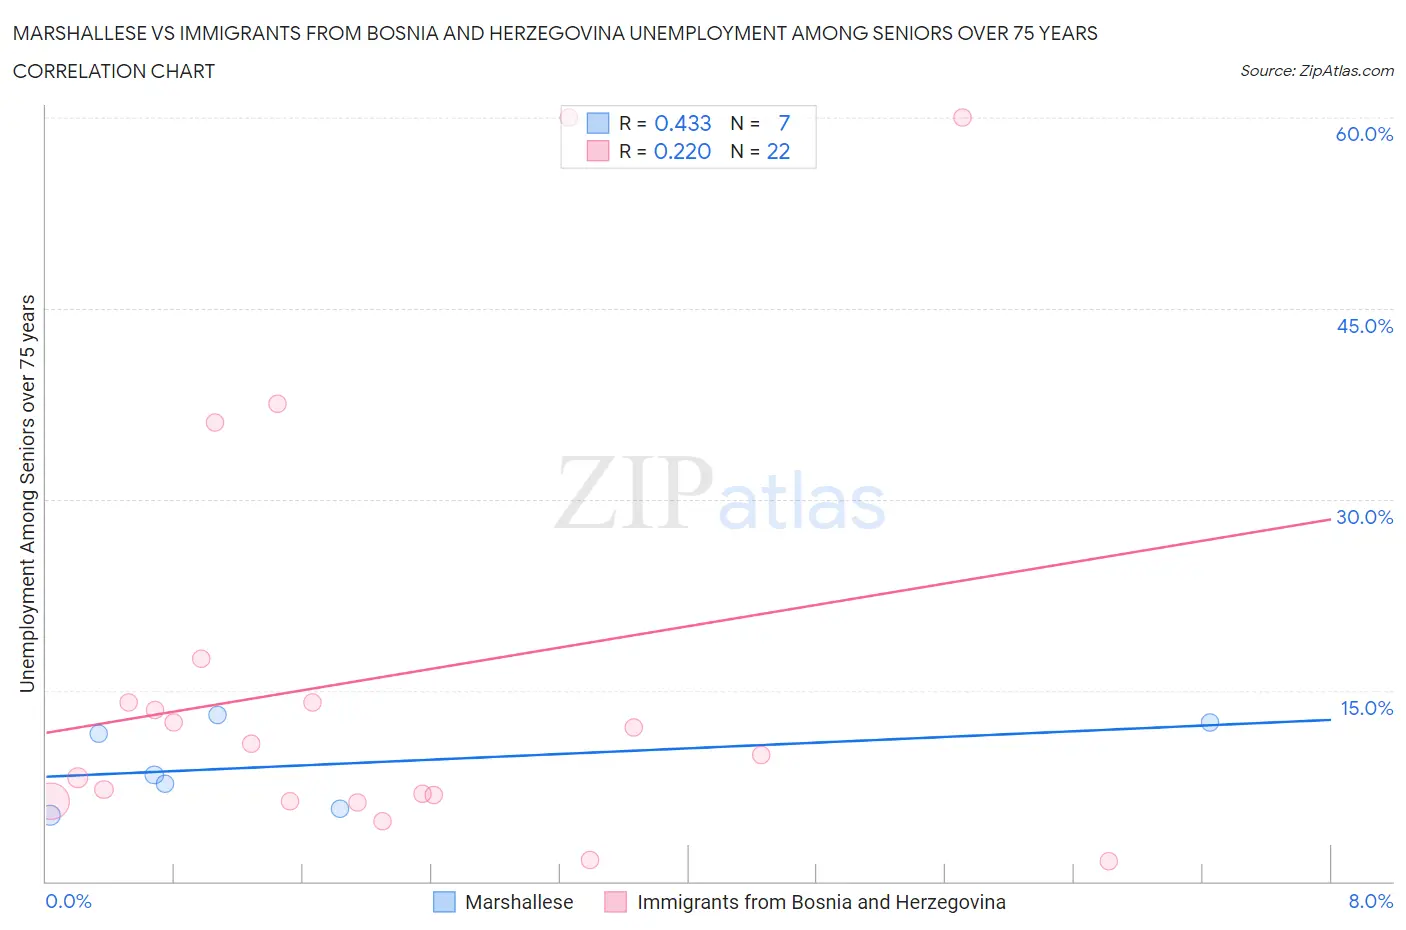 Marshallese vs Immigrants from Bosnia and Herzegovina Unemployment Among Seniors over 75 years